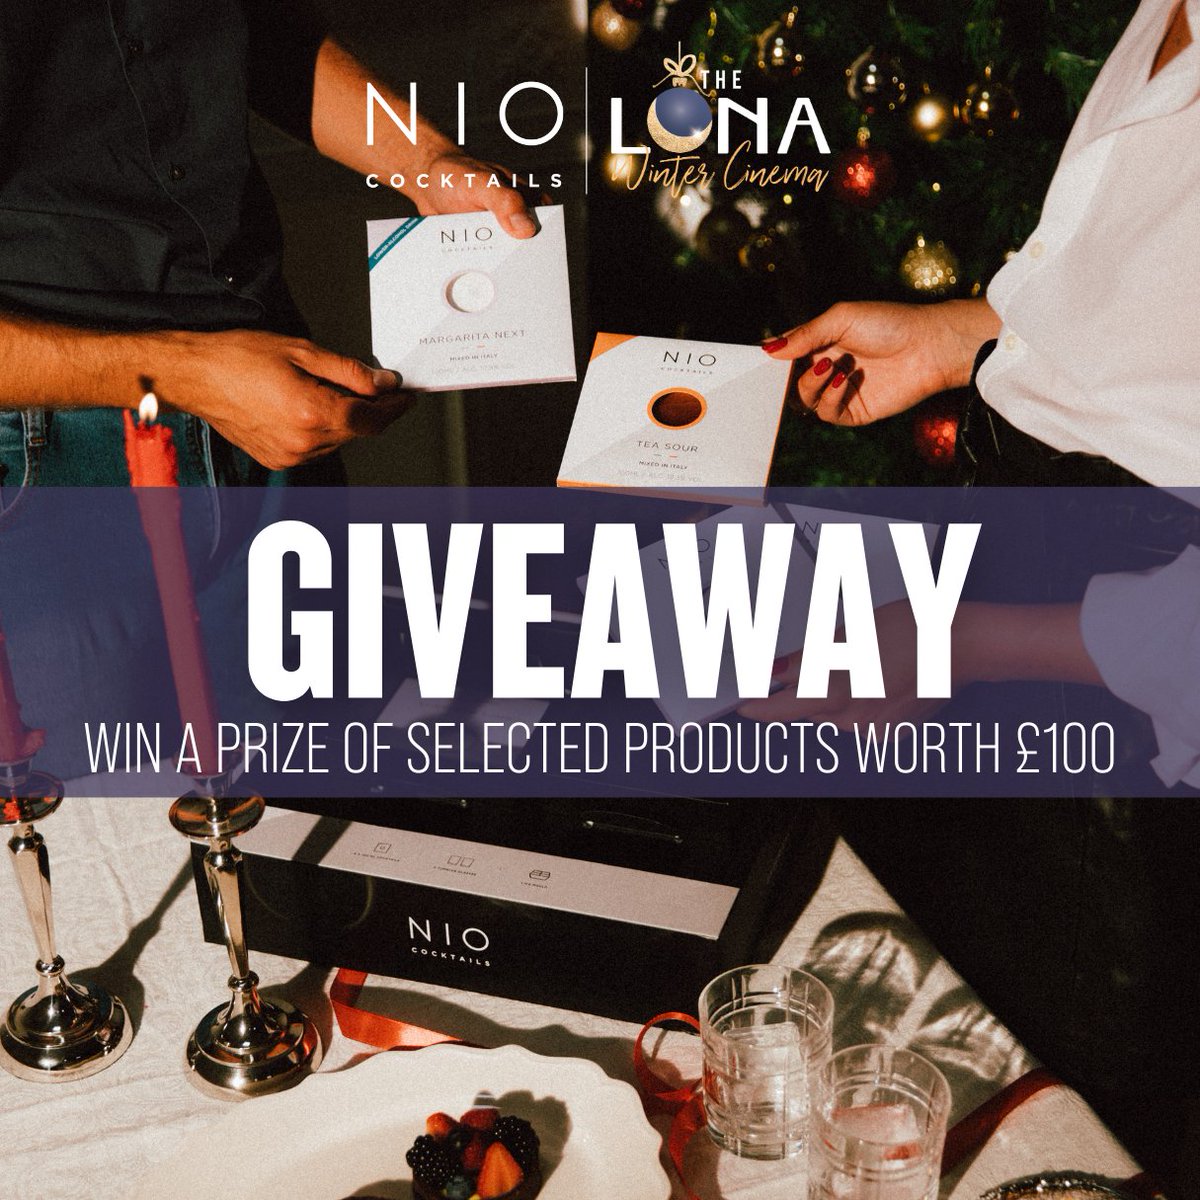 GIVEAWAY ALERT! Unwrap the Festive Magic with NIO Cocktails! We're thrilled to announce an exciting collaboration with NIO Cocktails, offering one lucky winner the chance to score over £100 in prizes. HOW TO ENTER: Head to our Instagram to enter. Good luck!